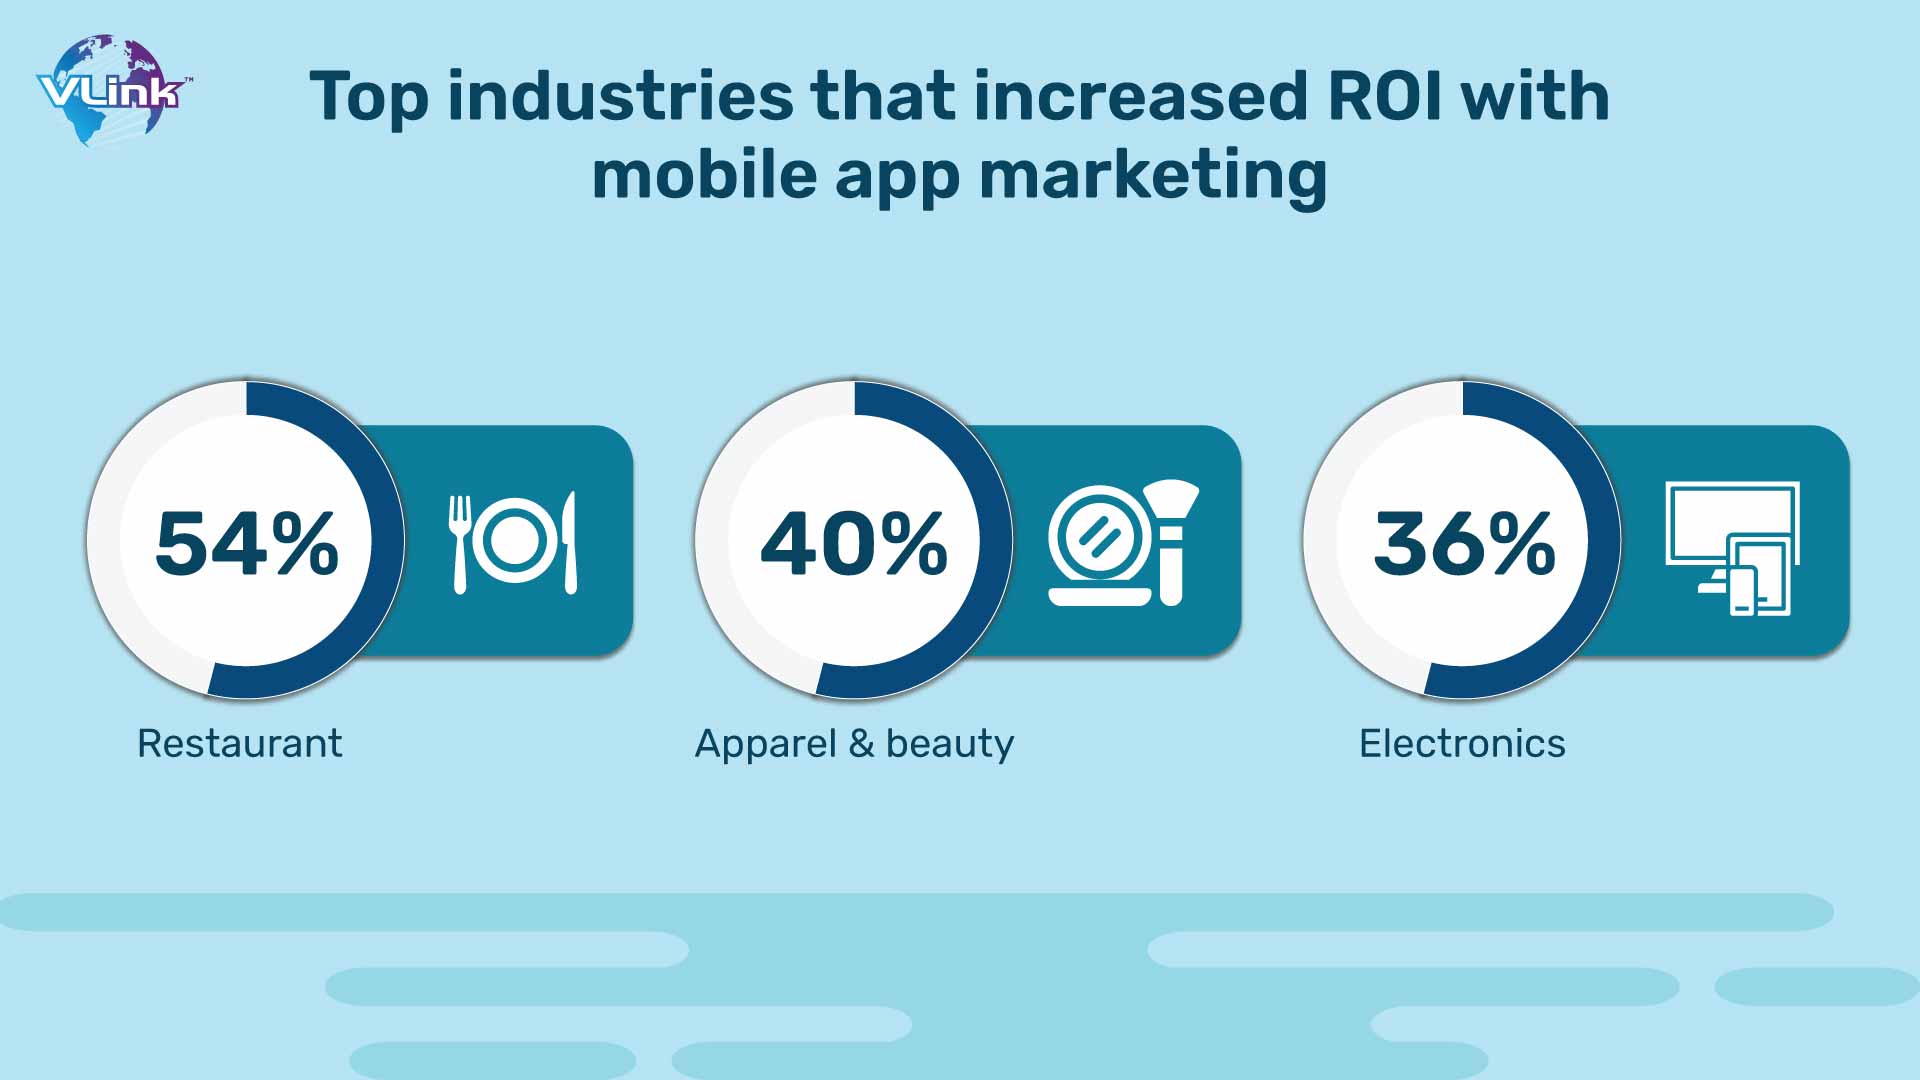 Top industries that increased ROI with mobile app marketing